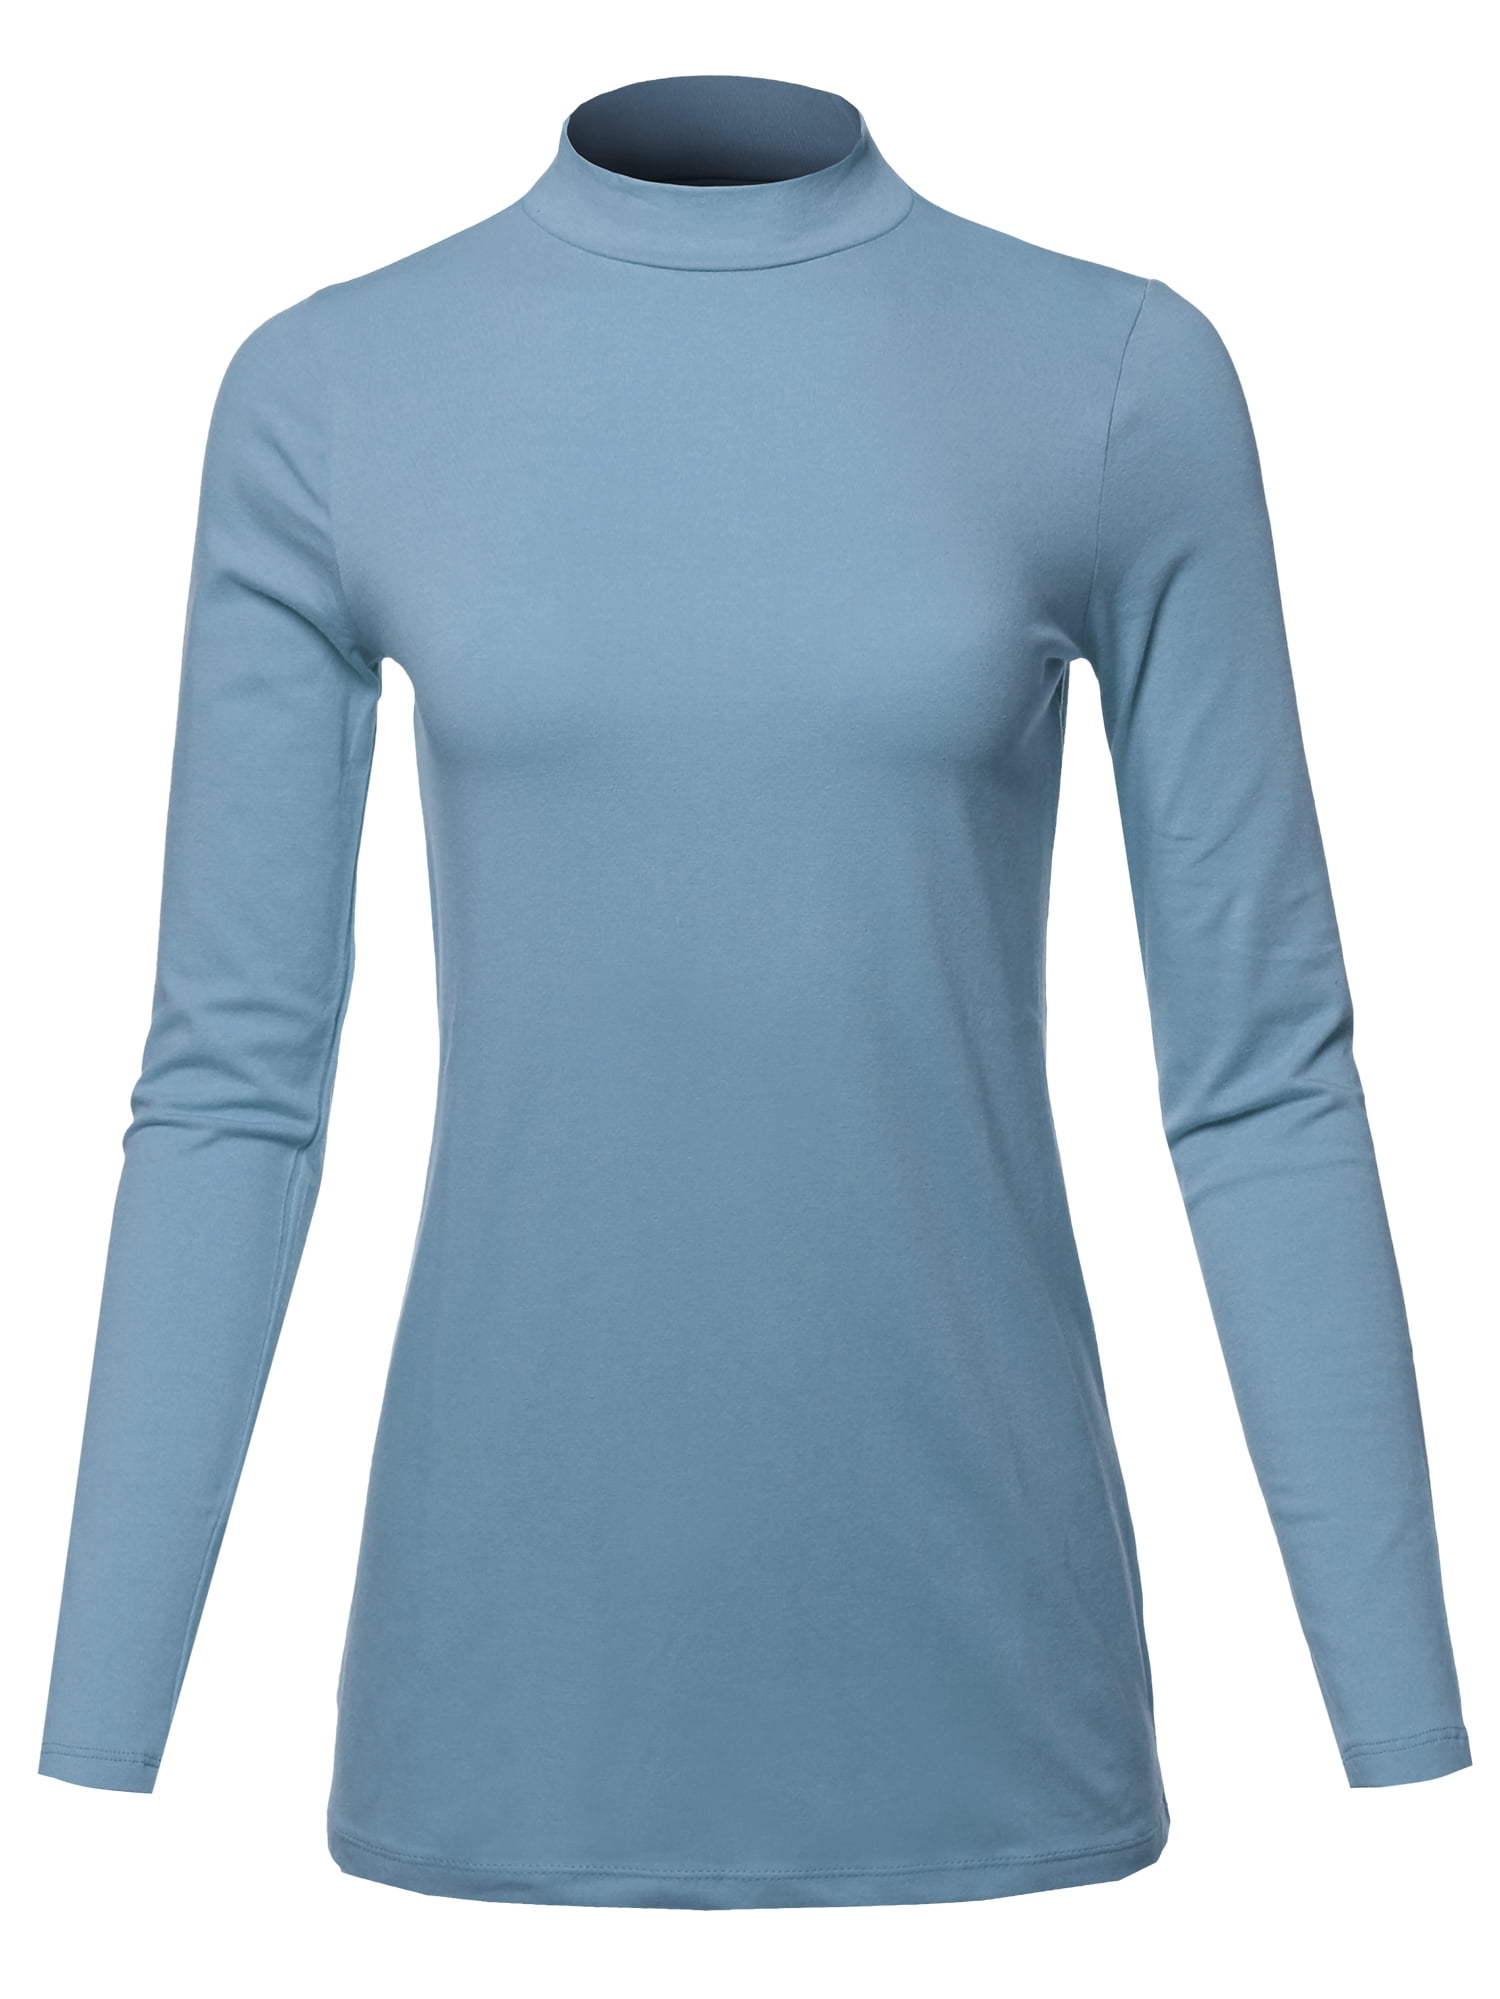 Download A2Y - A2Y Women's Basic Solid Soft Cotton Long Sleeve Mock ...